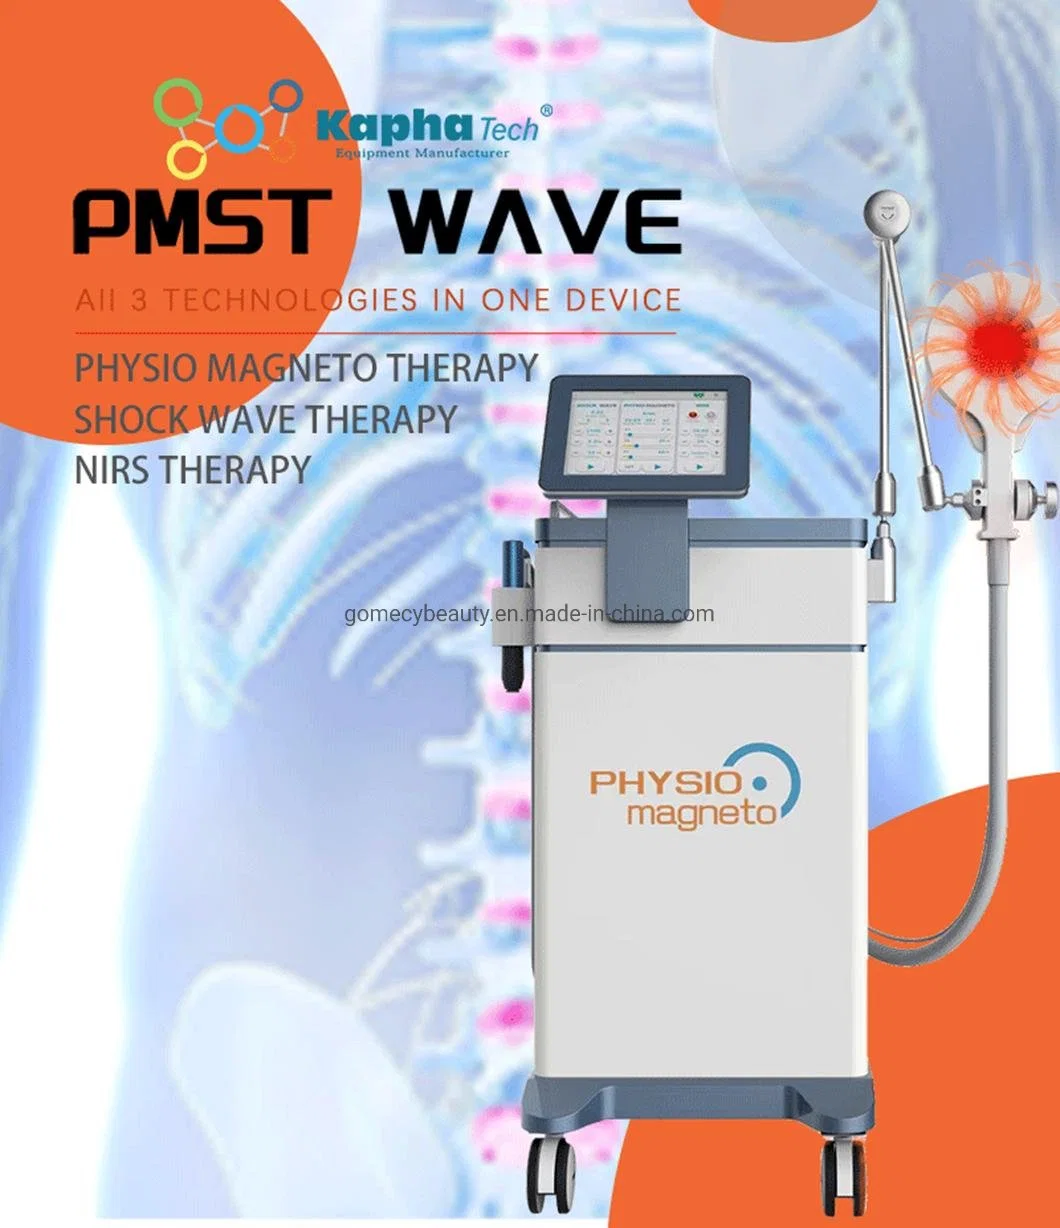 Type Pulsed Magneto Therapy 3 in 1 Shock Wave Physical Pain Relief Treatment Cryo Cellulite Removal Body Contouring Machine Shockwave Therapy Cellulite